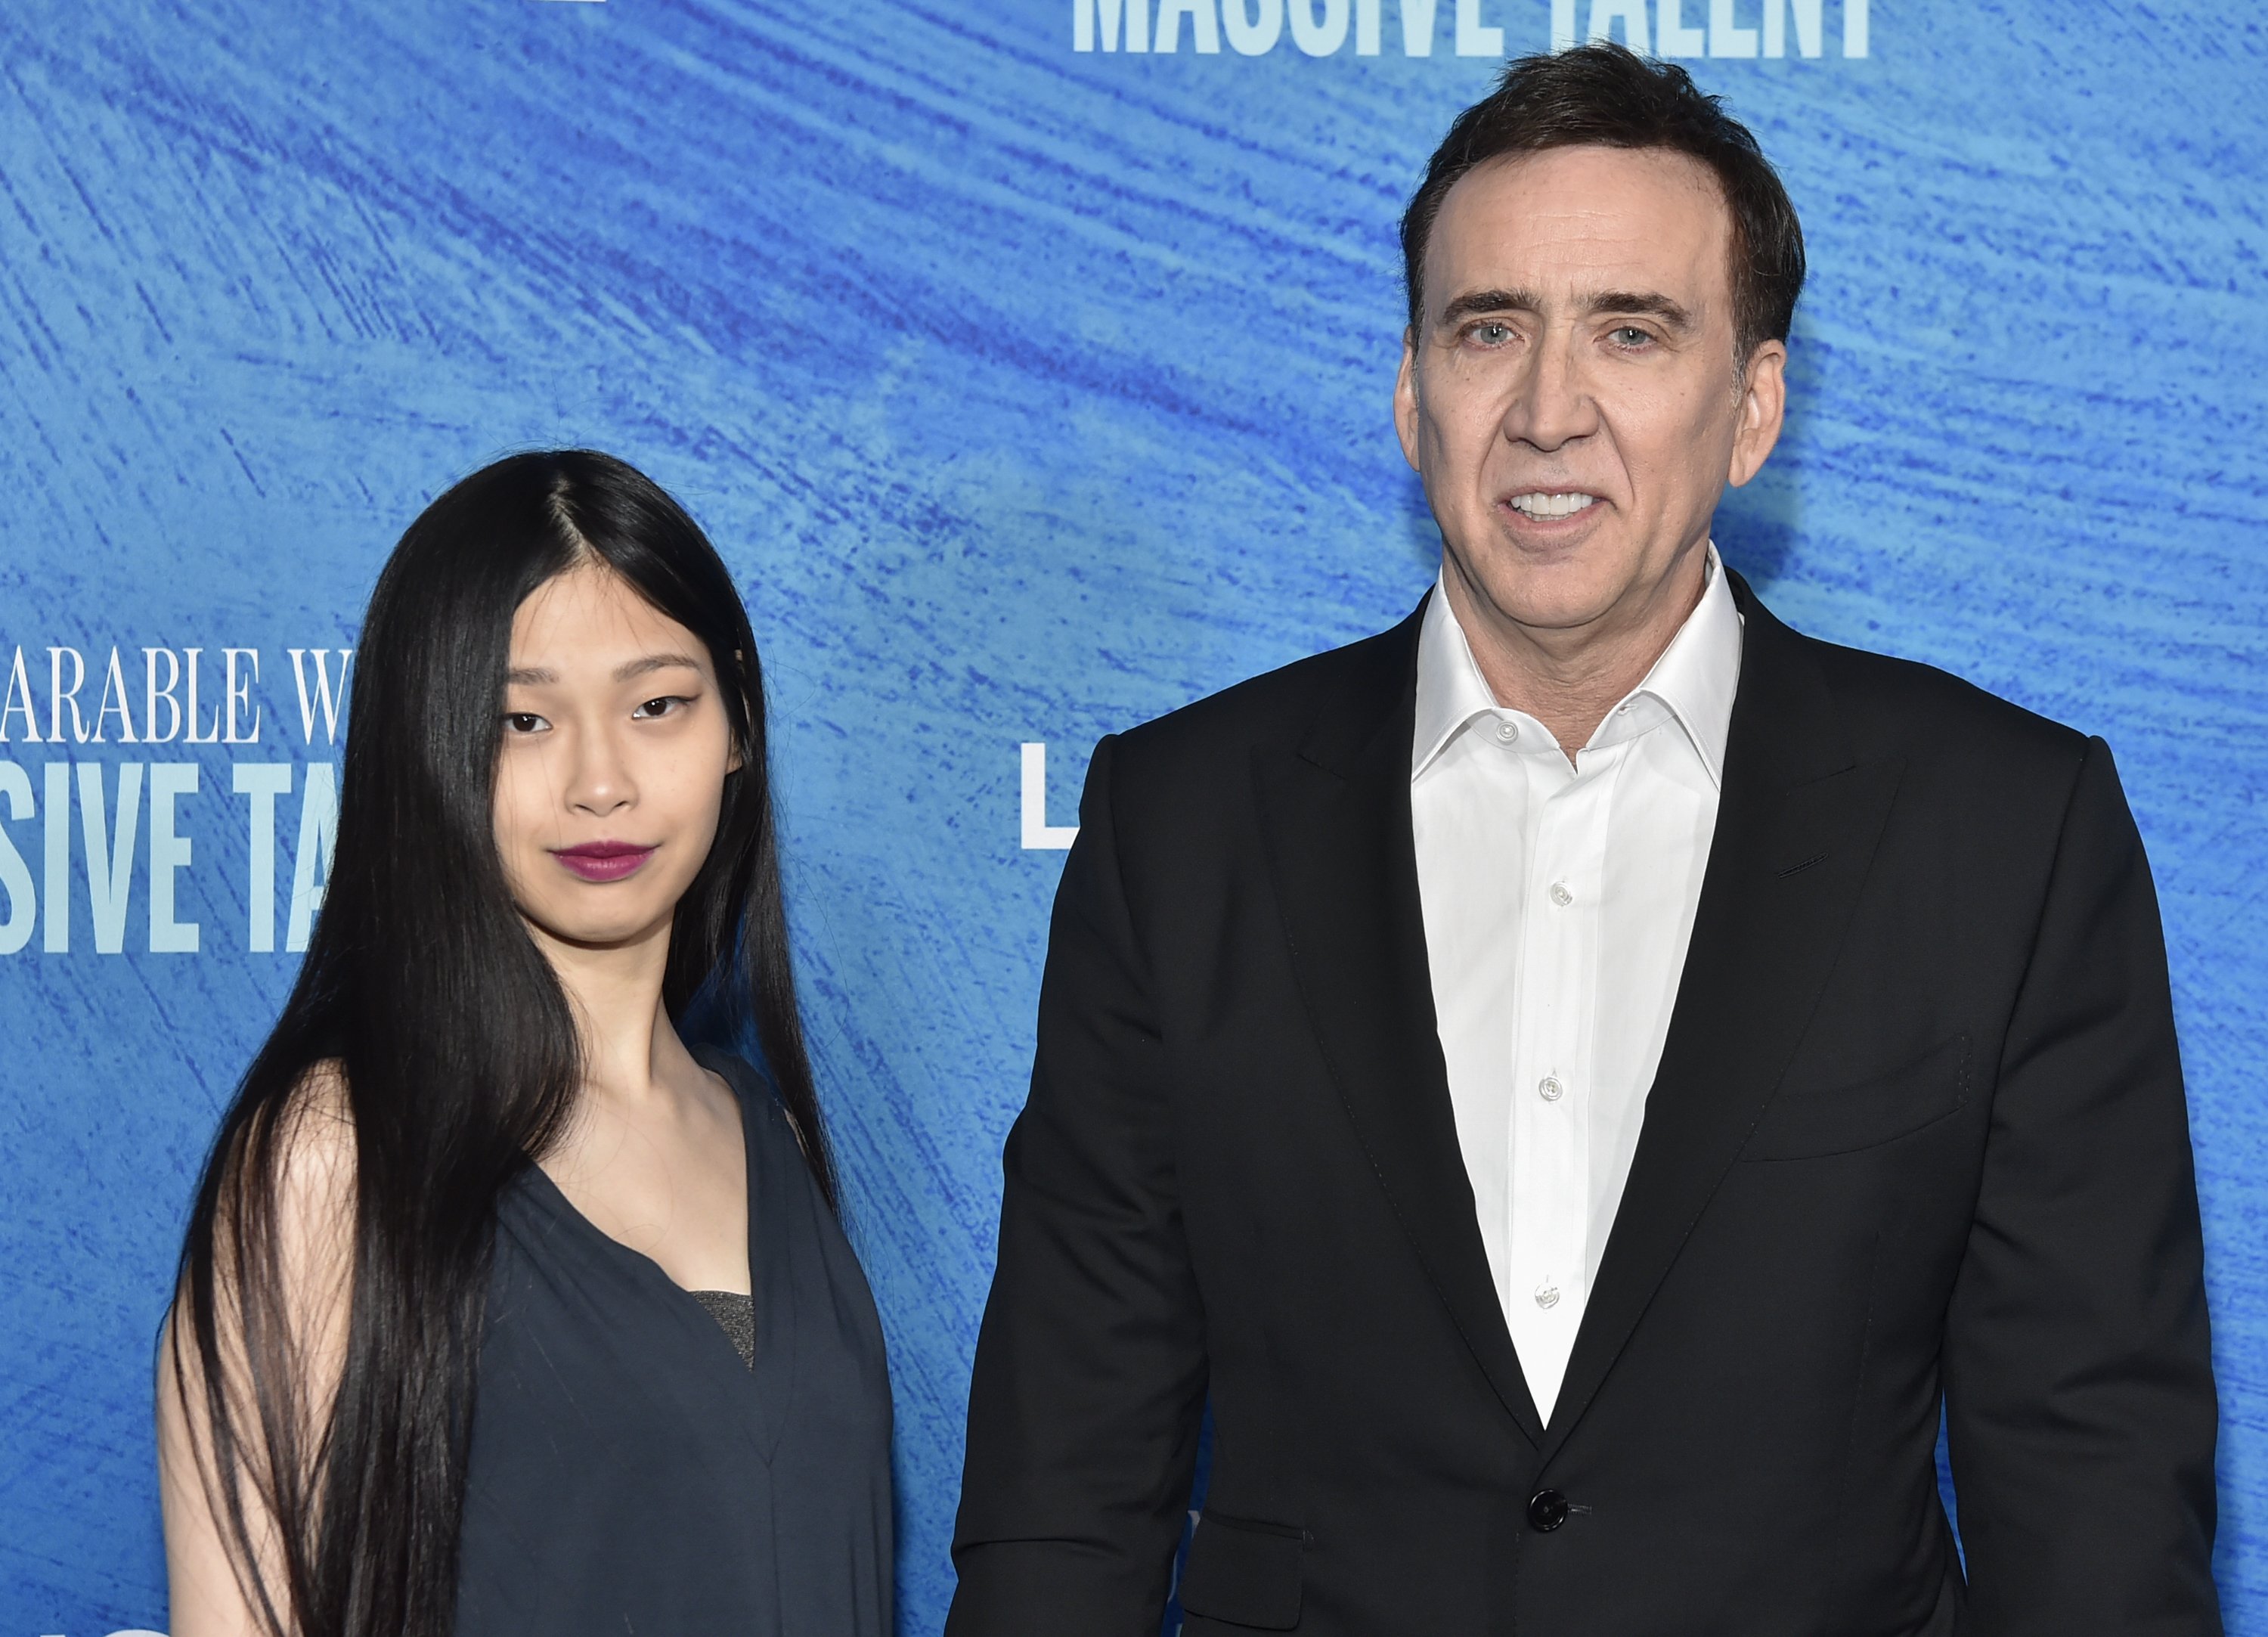 Riko Shibata and her husband Nicolas Cage attending the Los Angeles special screening of "The Unbearable Weight of Massive Talent" at DGA Theater Complex on April 18, 2022 in Los Angeles, California. / Source: Getty Images